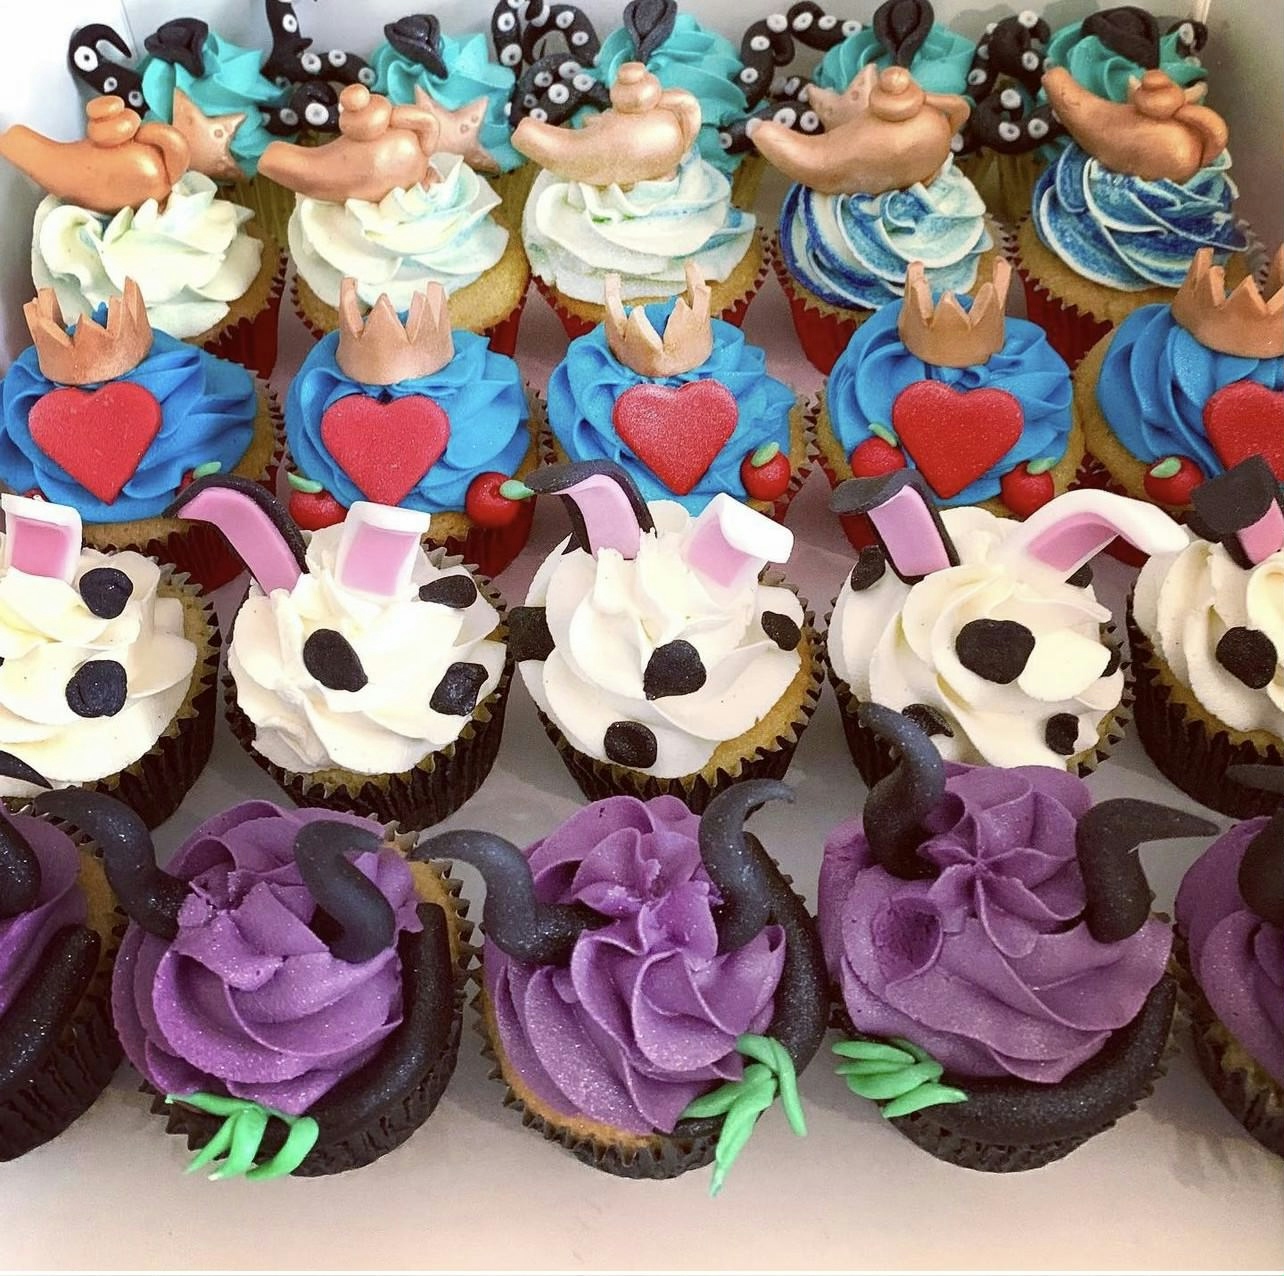 Purple, White and blue cupcakes with decorations on top